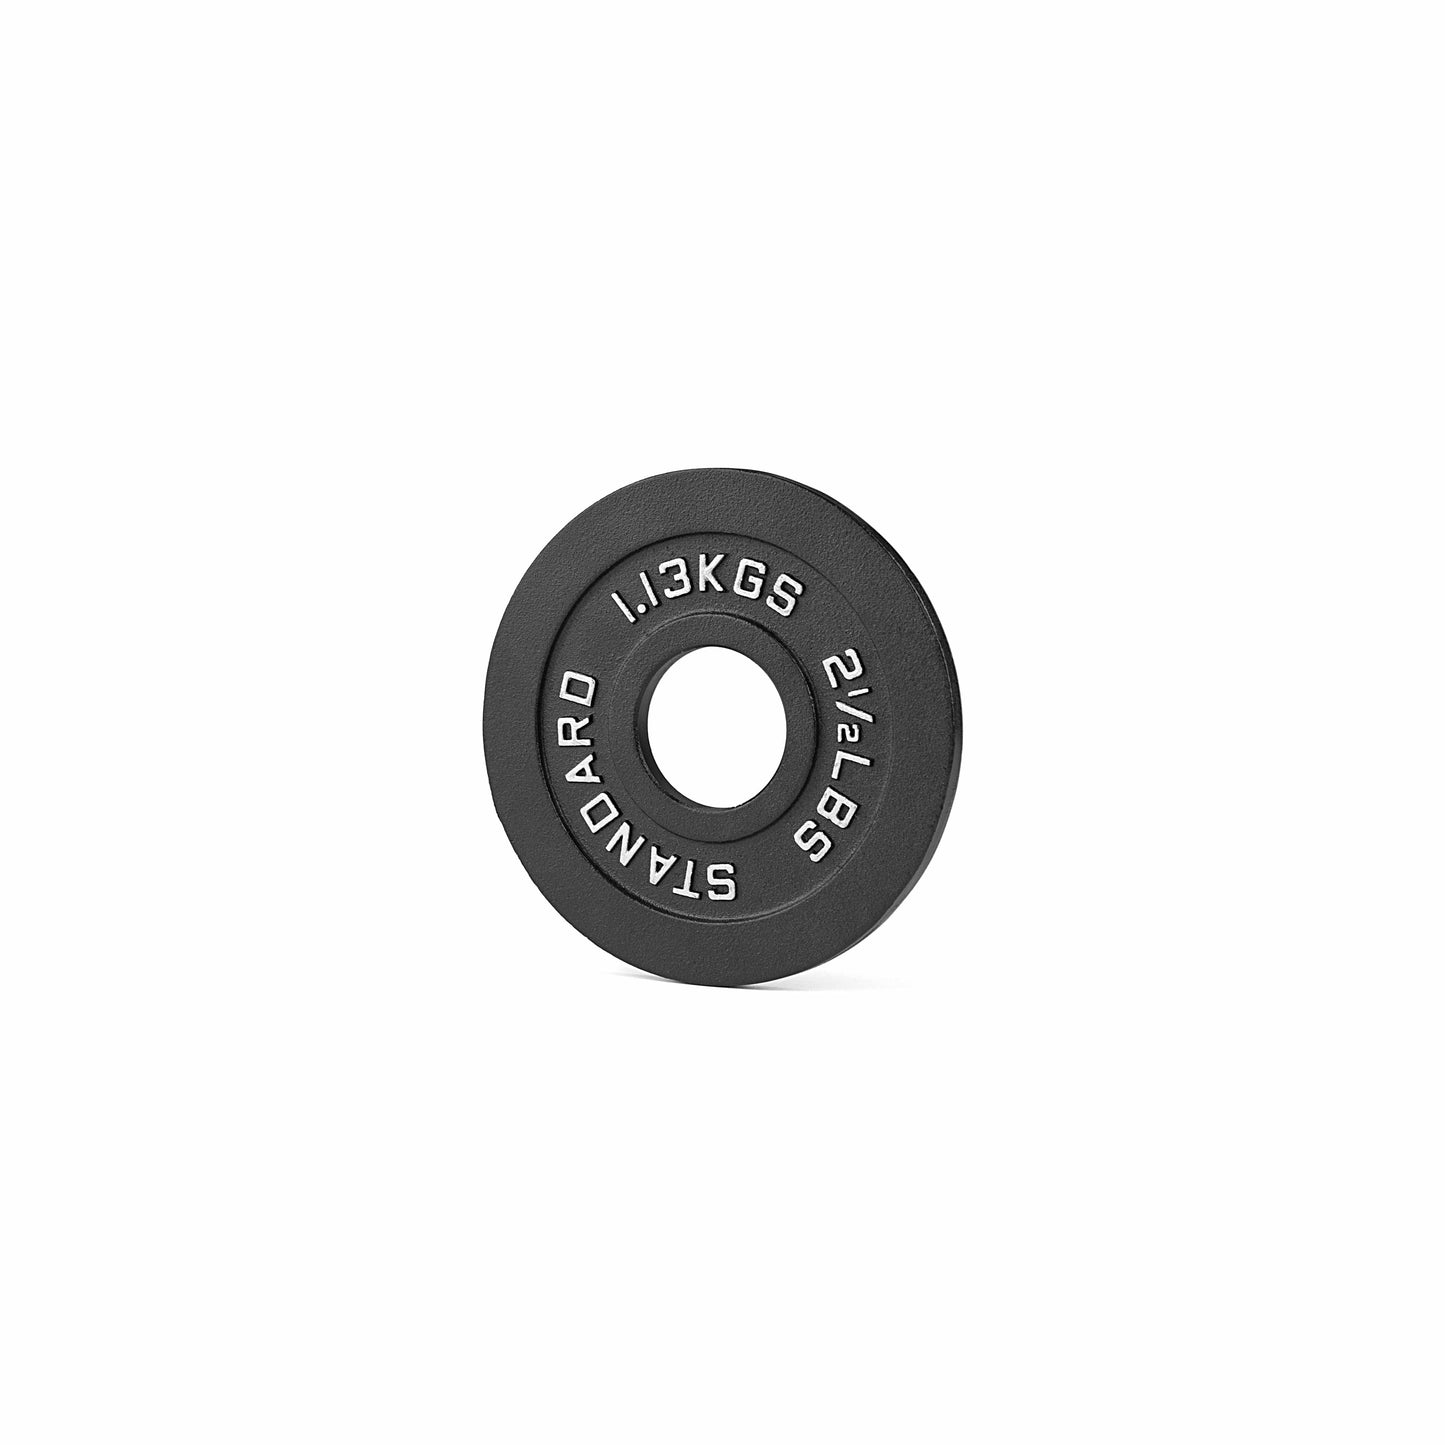 PAIR 8-65 Lb Loadable Dumbbell 14.5" With Weights